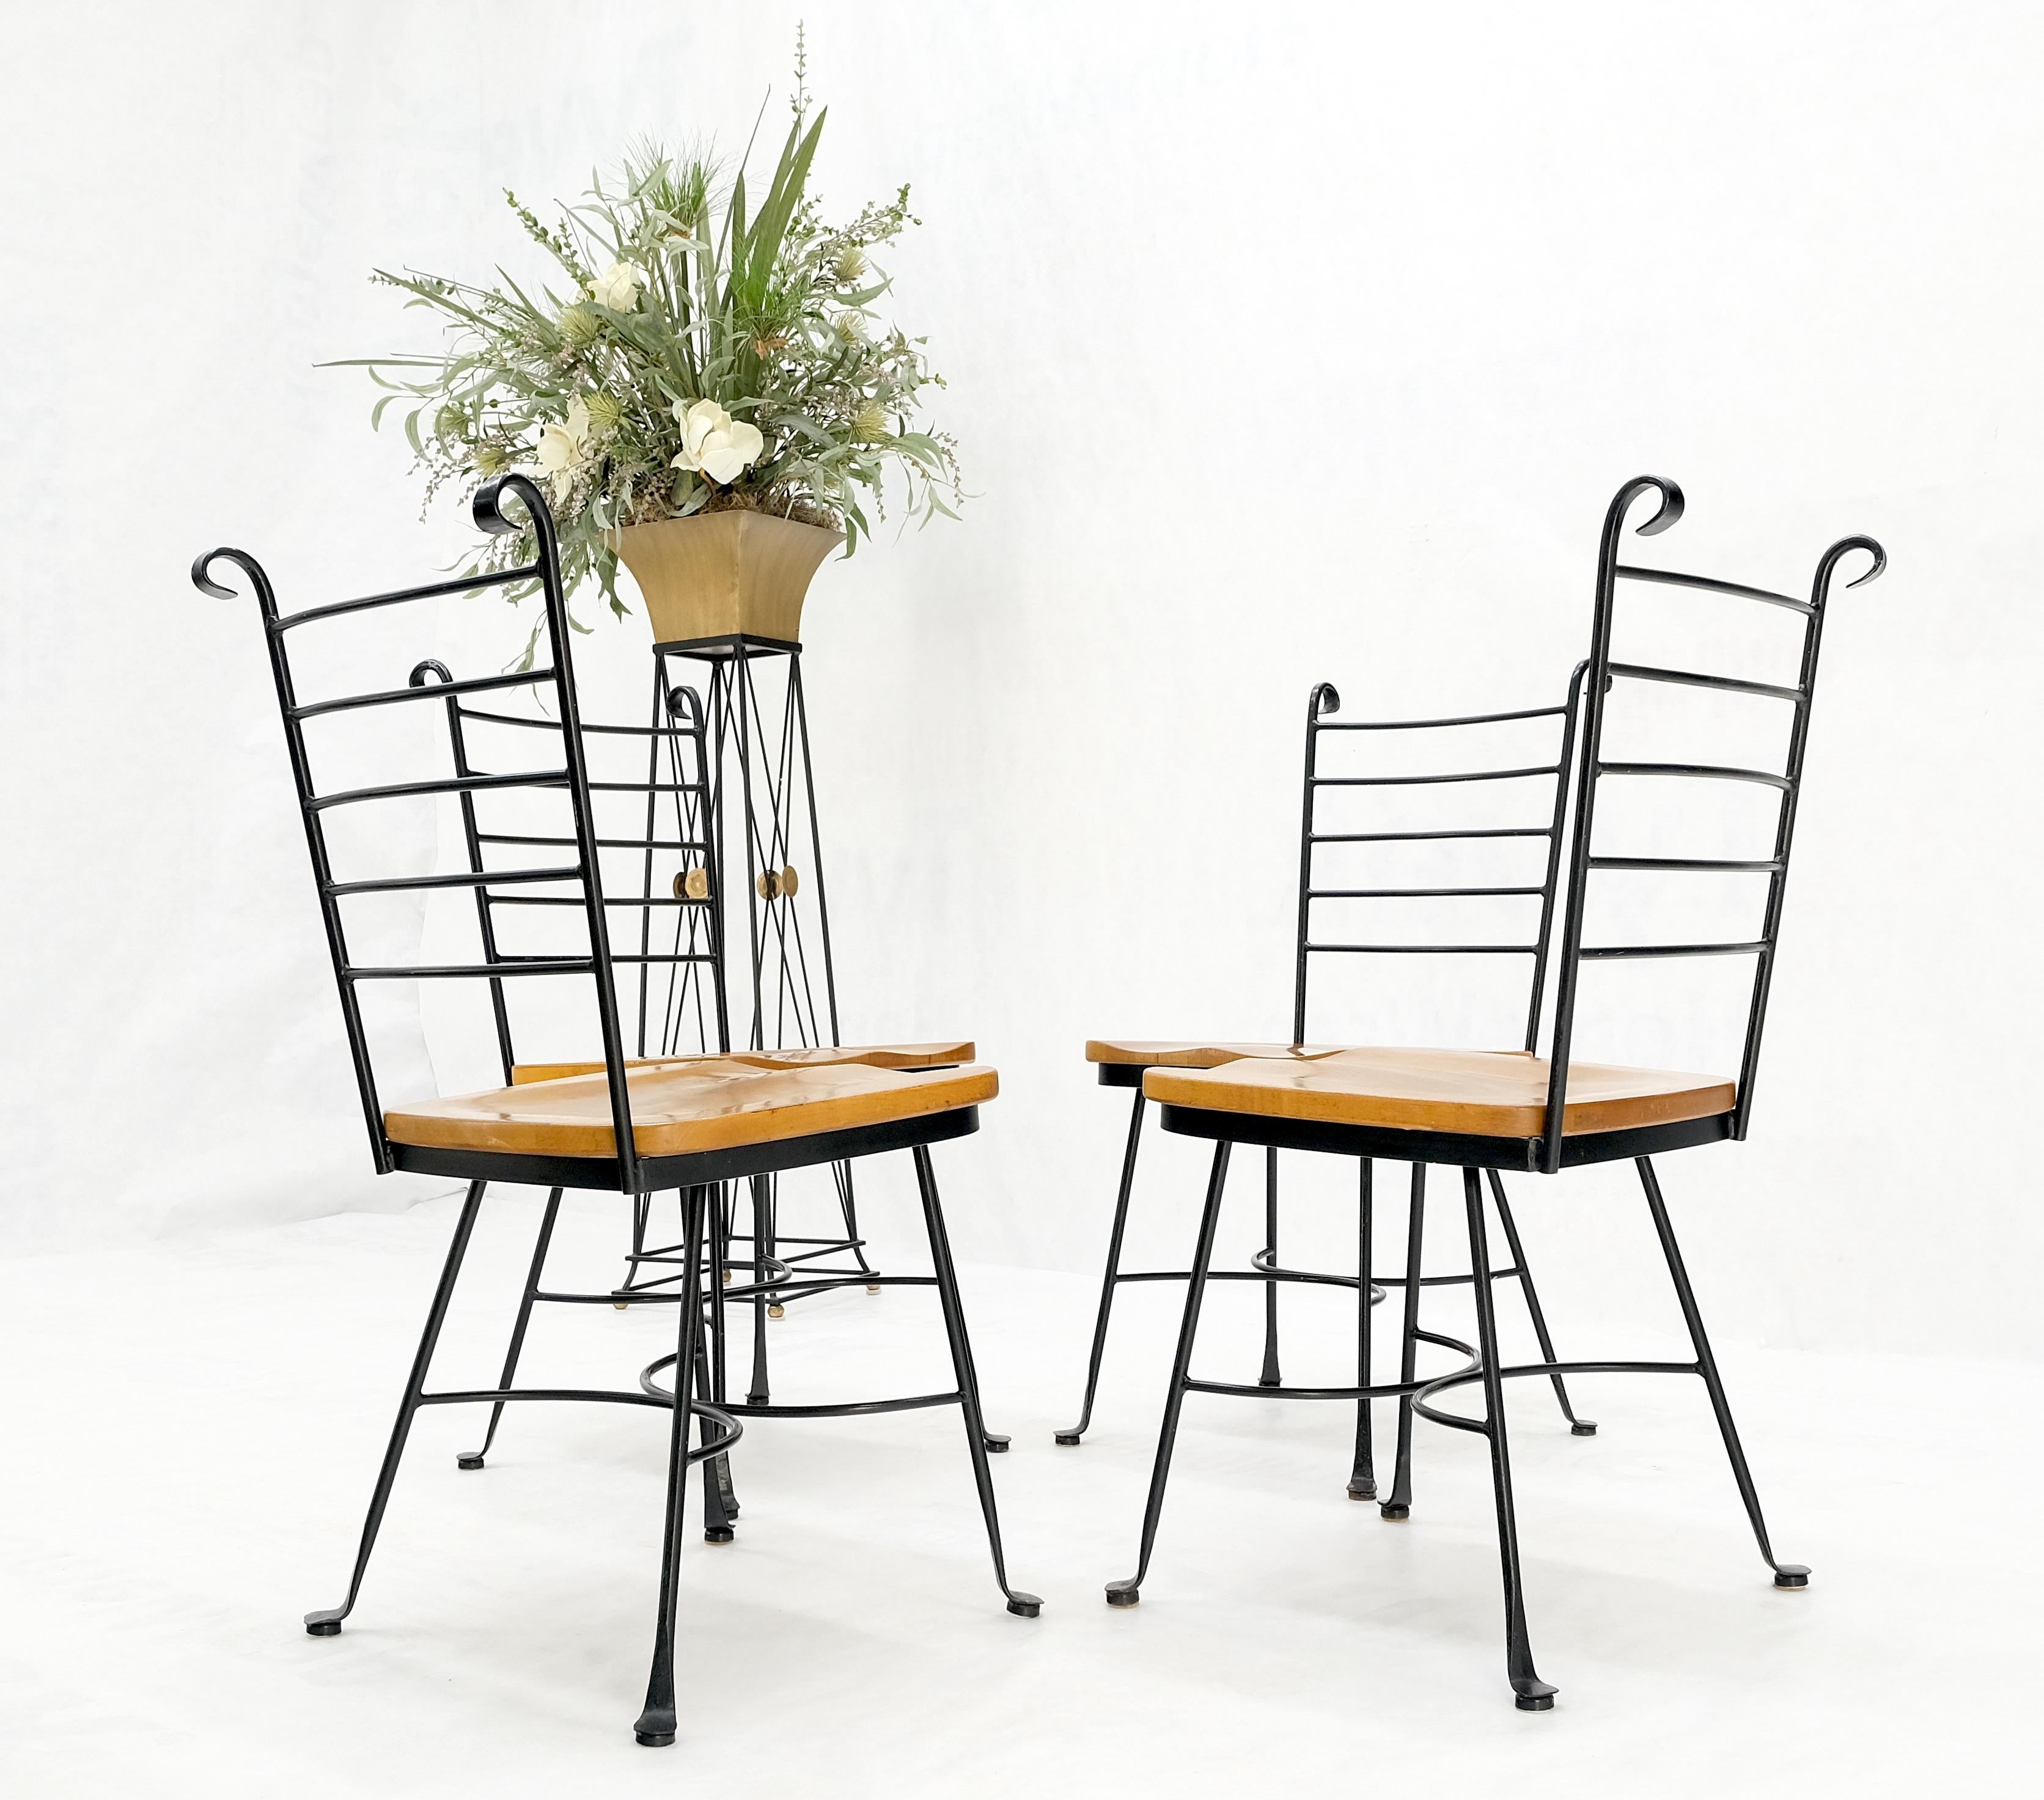 American Mid-Century Modern Wrought Iron & Solid Birch Seats Dining Chairs Mint For Sale 4